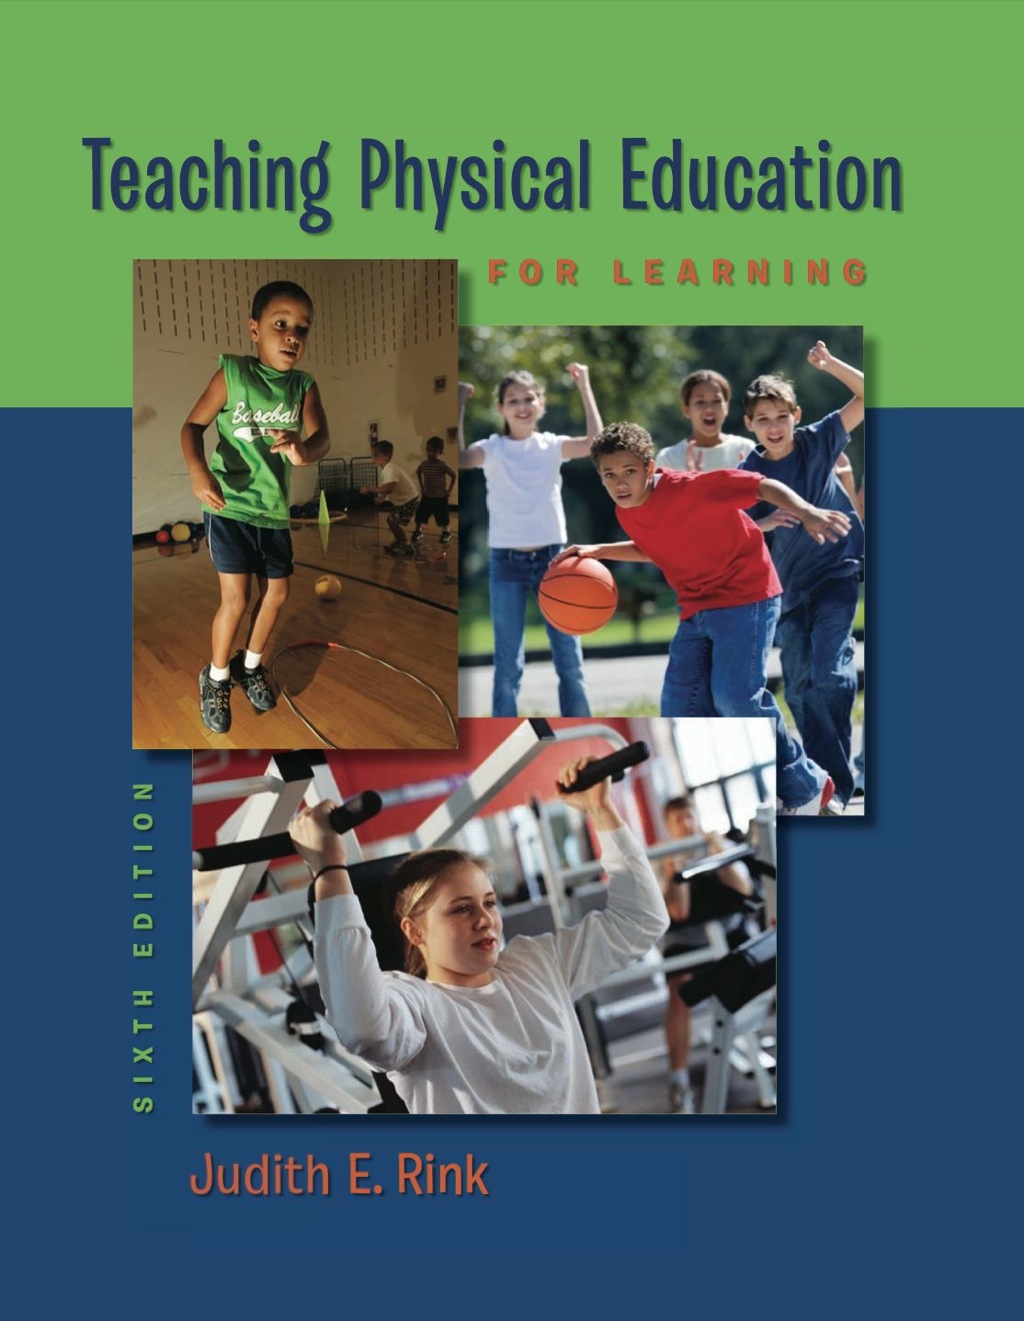 Teaching Physical Education for Learning (eBook Rental)